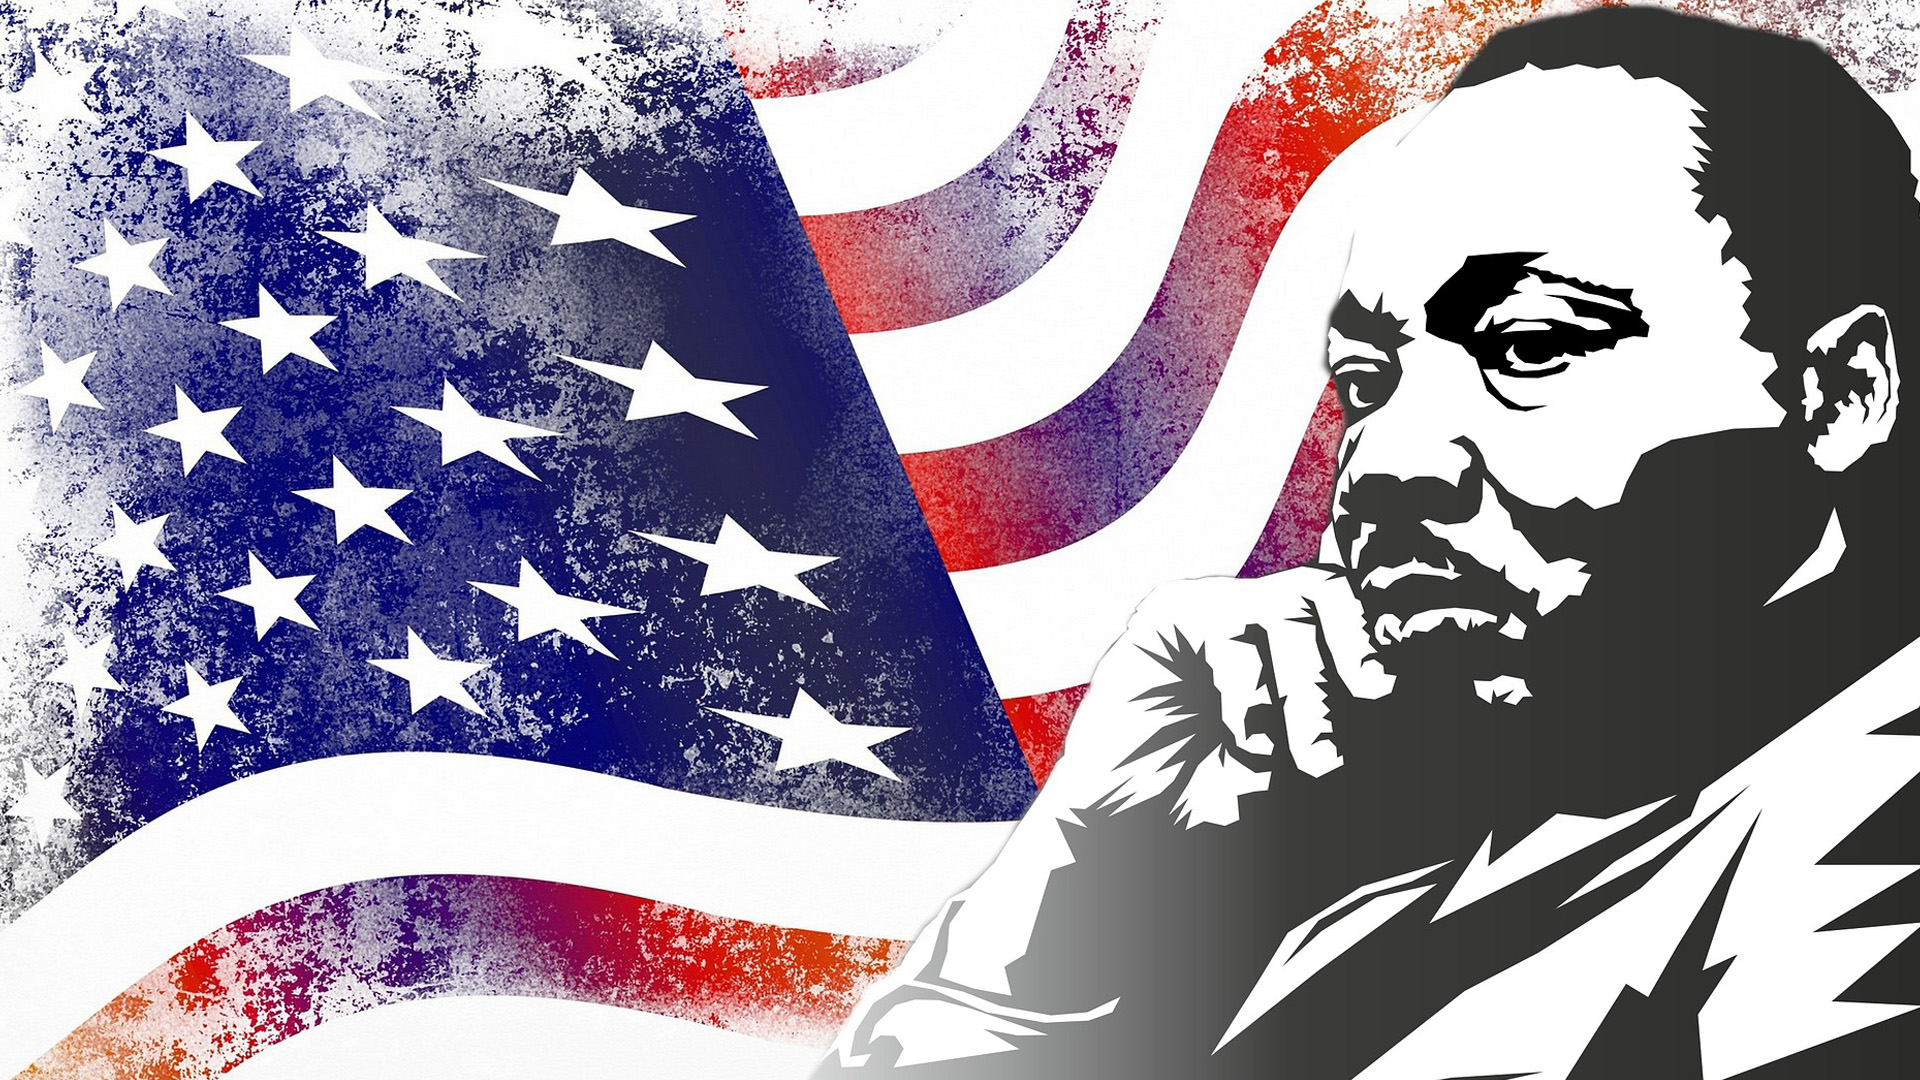 Red, White, and Blue illustrated Flag in the background with a illustrated Martin Luther King Jr. on the right side of the graphic with his hand resting on his face.